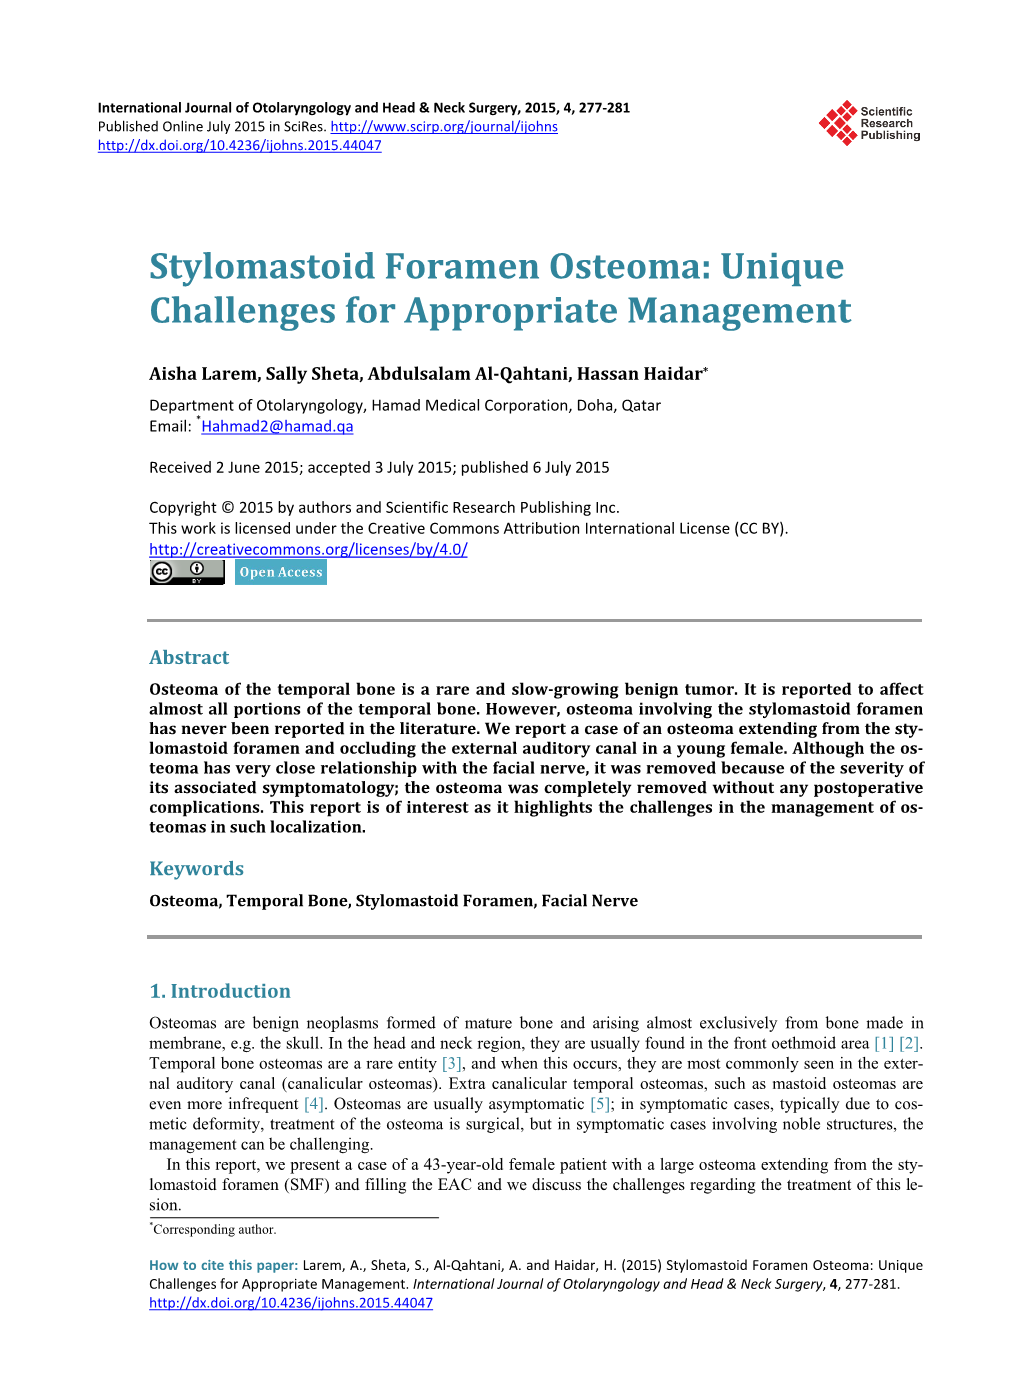 Stylomastoid Foramen Osteoma: Unique Challenges for Appropriate Management